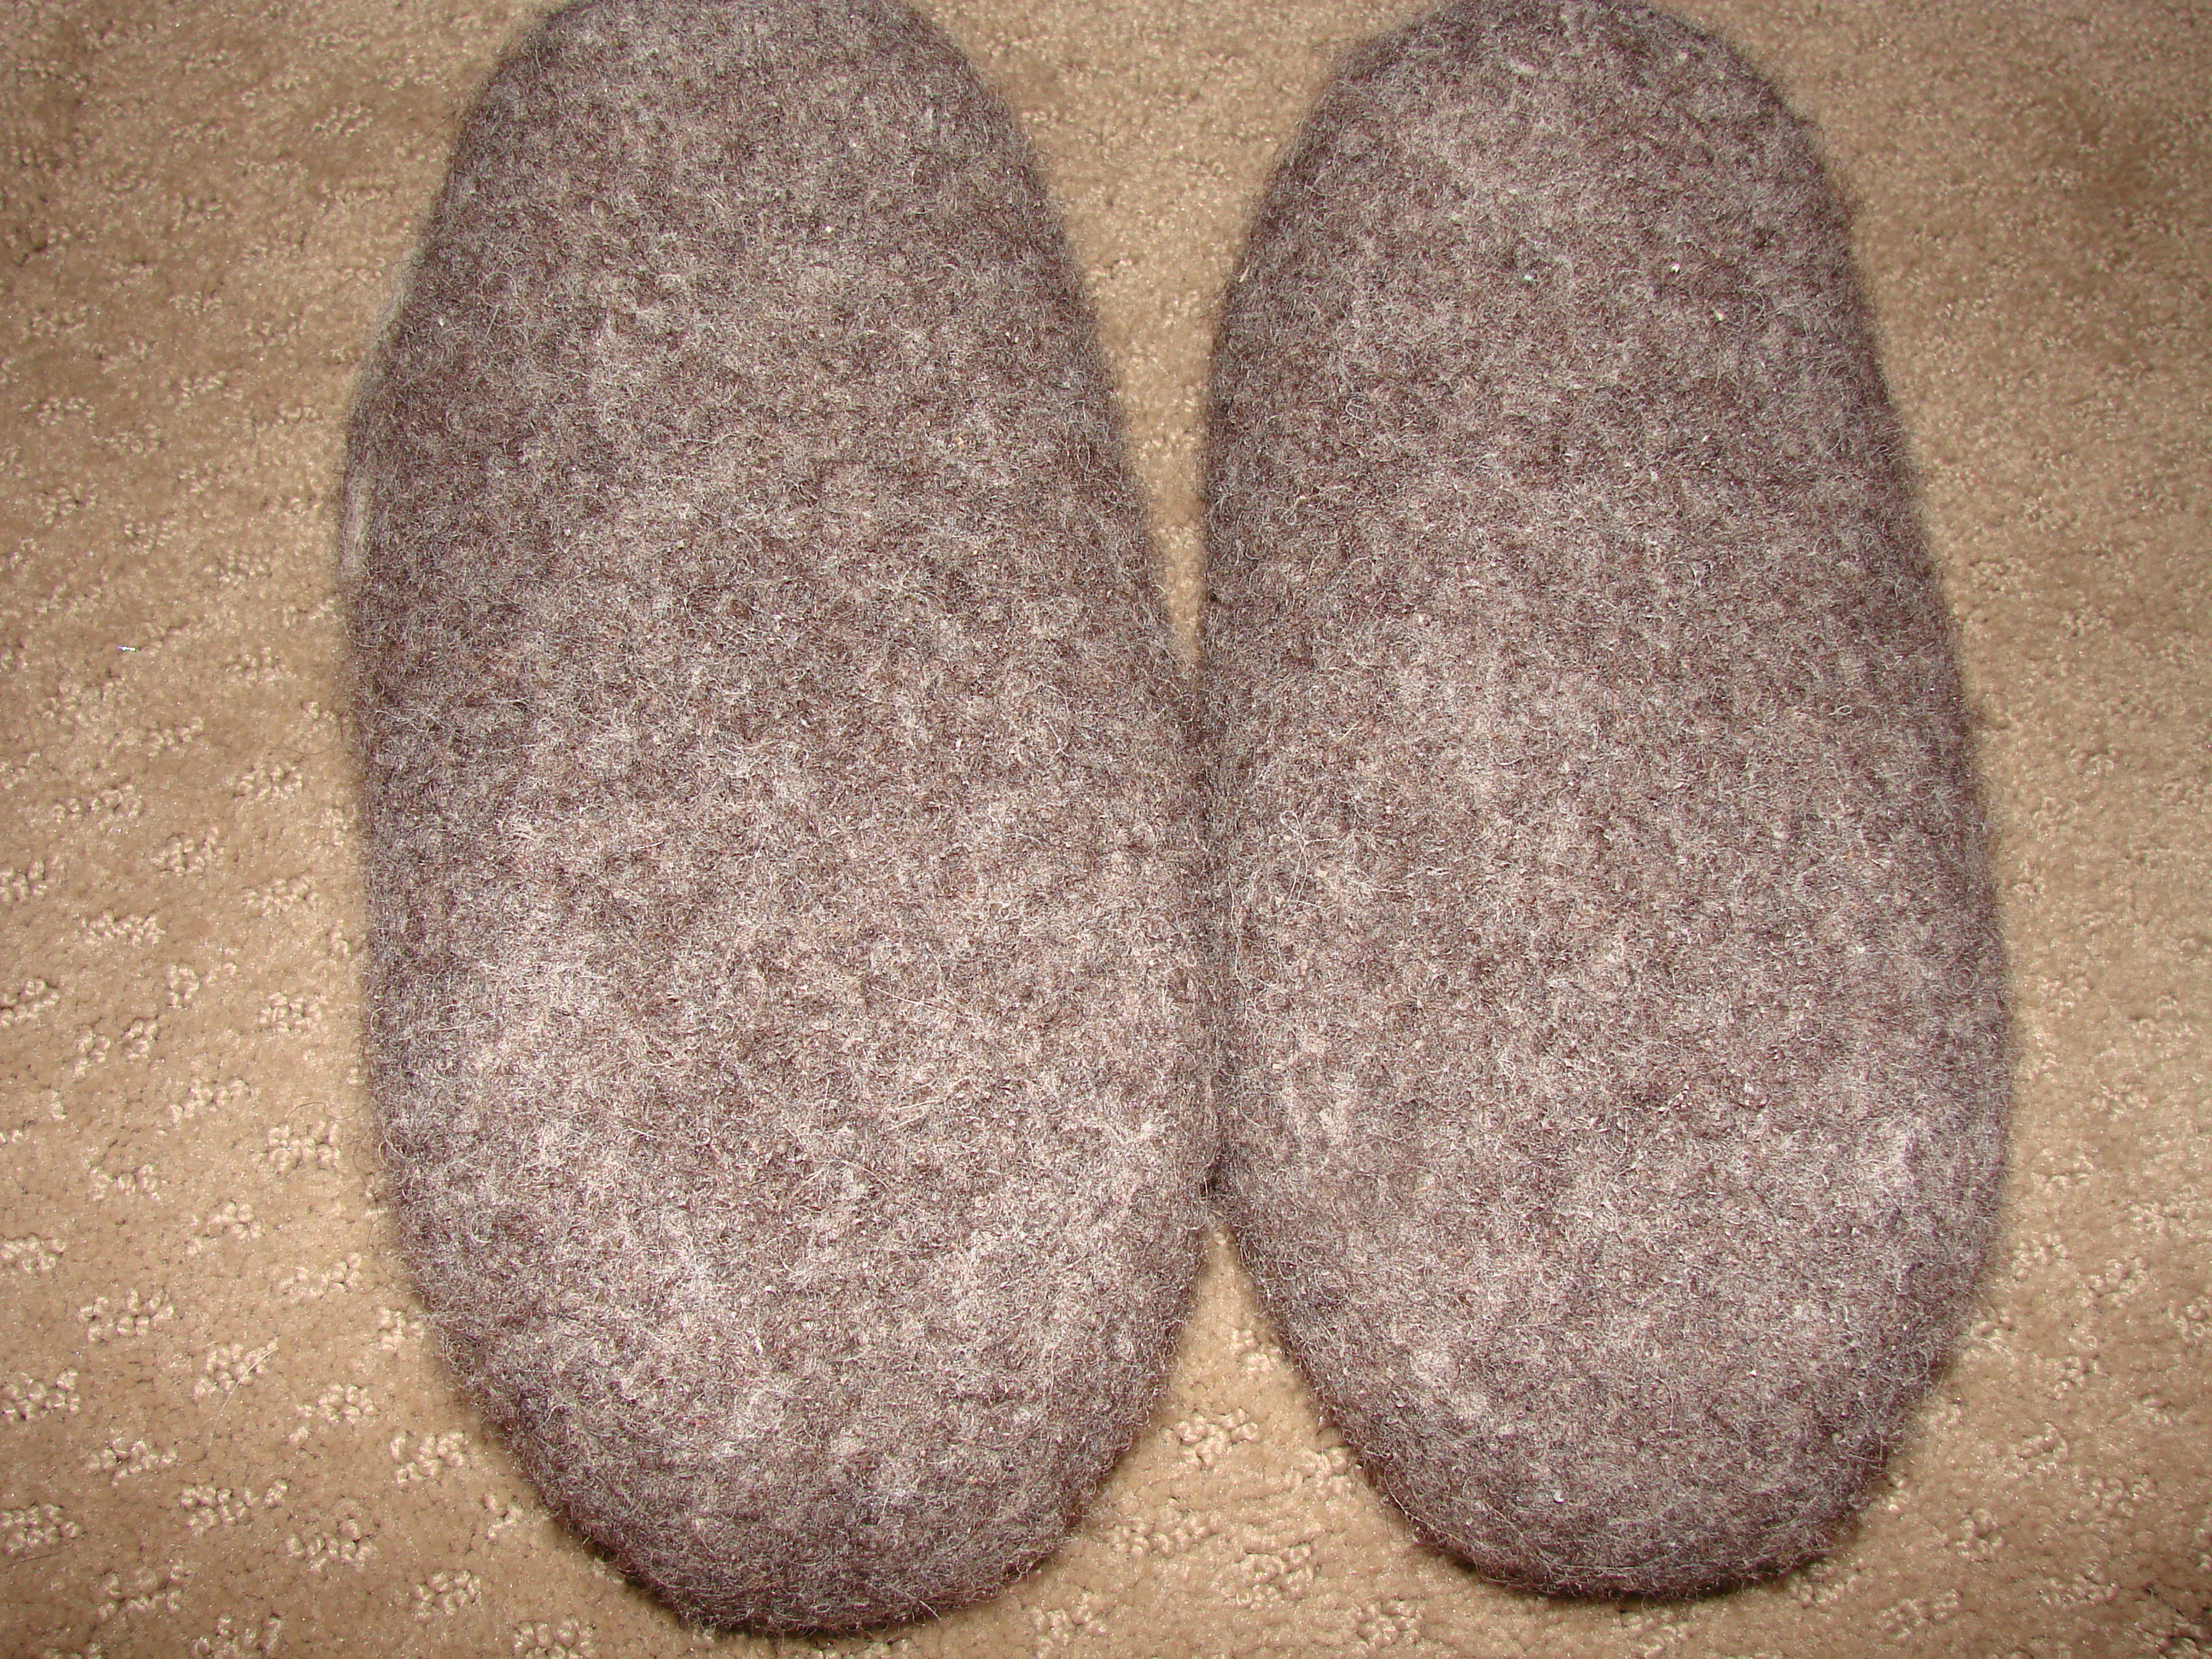 slippers with rubber bottoms